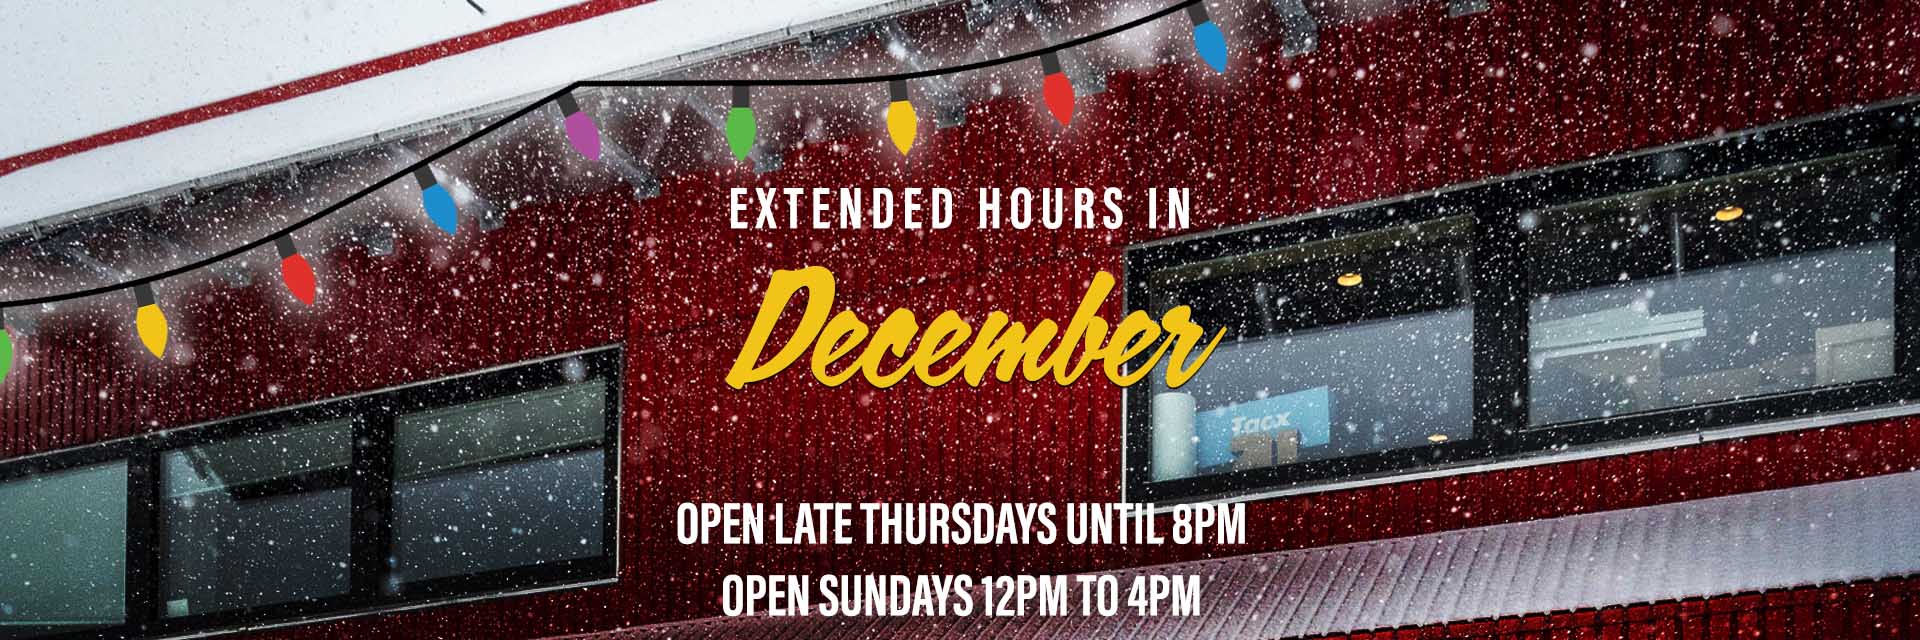 EXTENDED HOLIDAY HOURS AT THE RADICAL EDGE